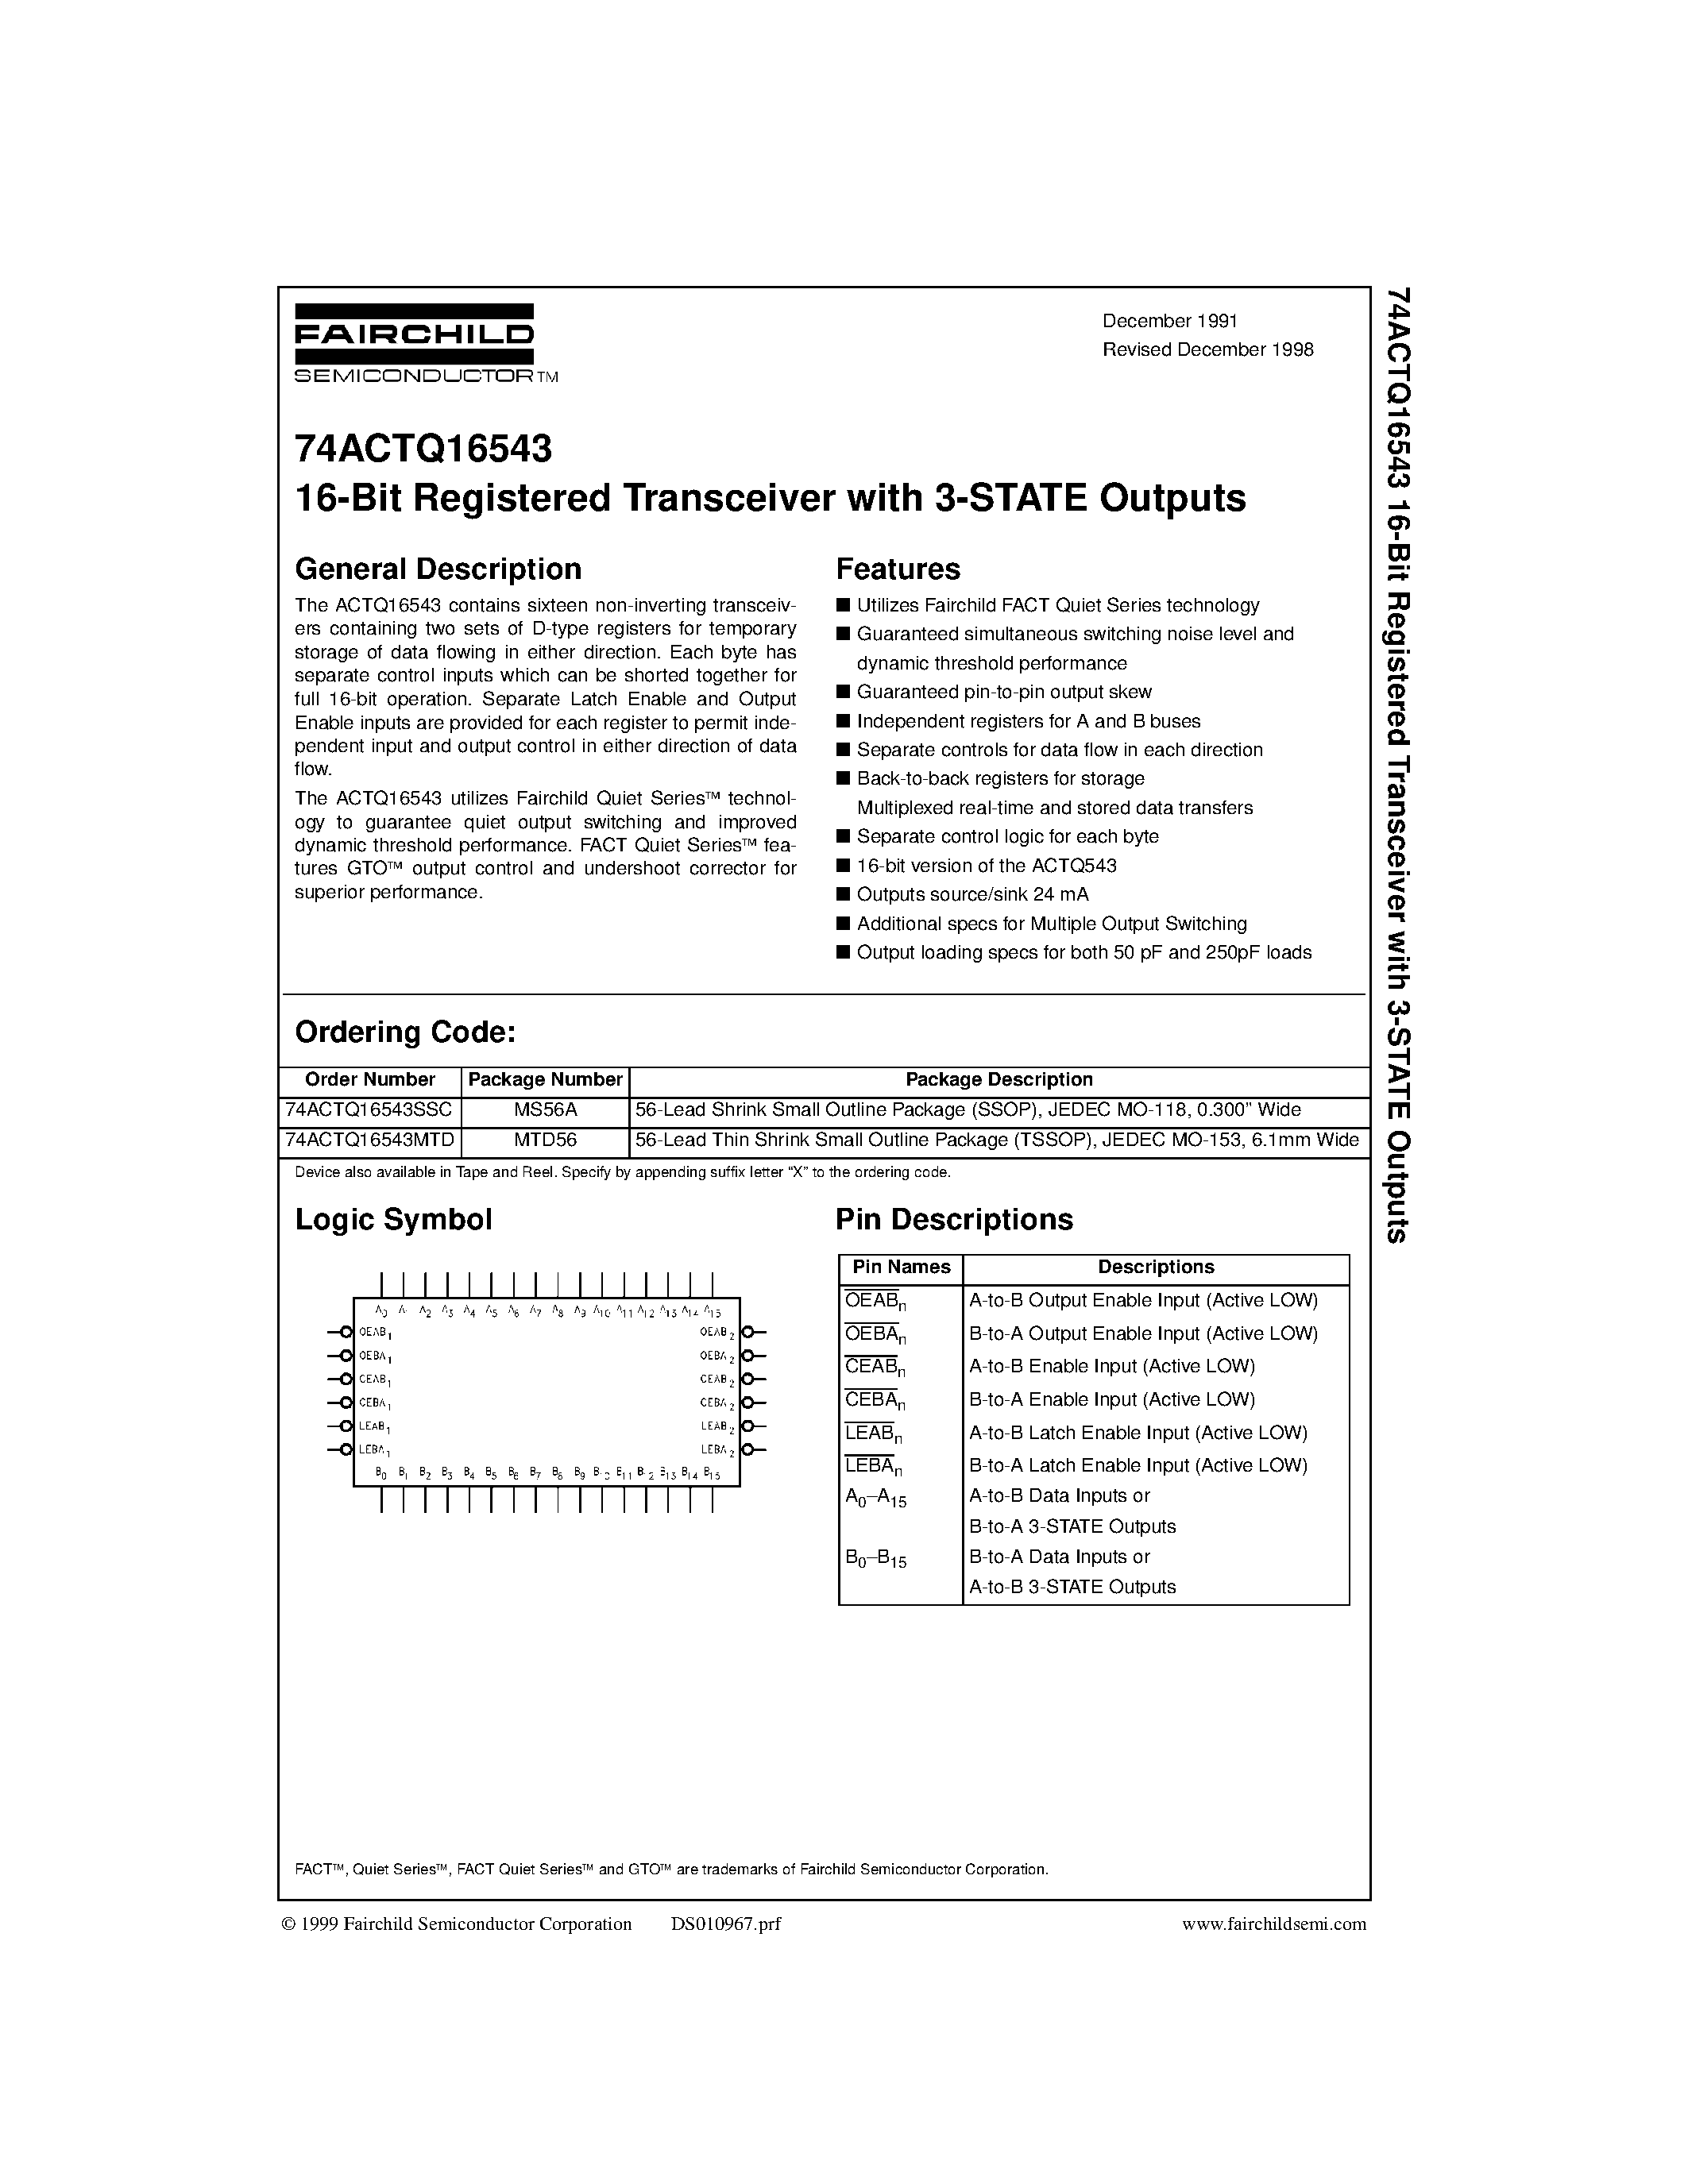 Datasheet 74ACTQ16543 - 16-Bit Registered Transceiver with 3-STATE Outputs page 1